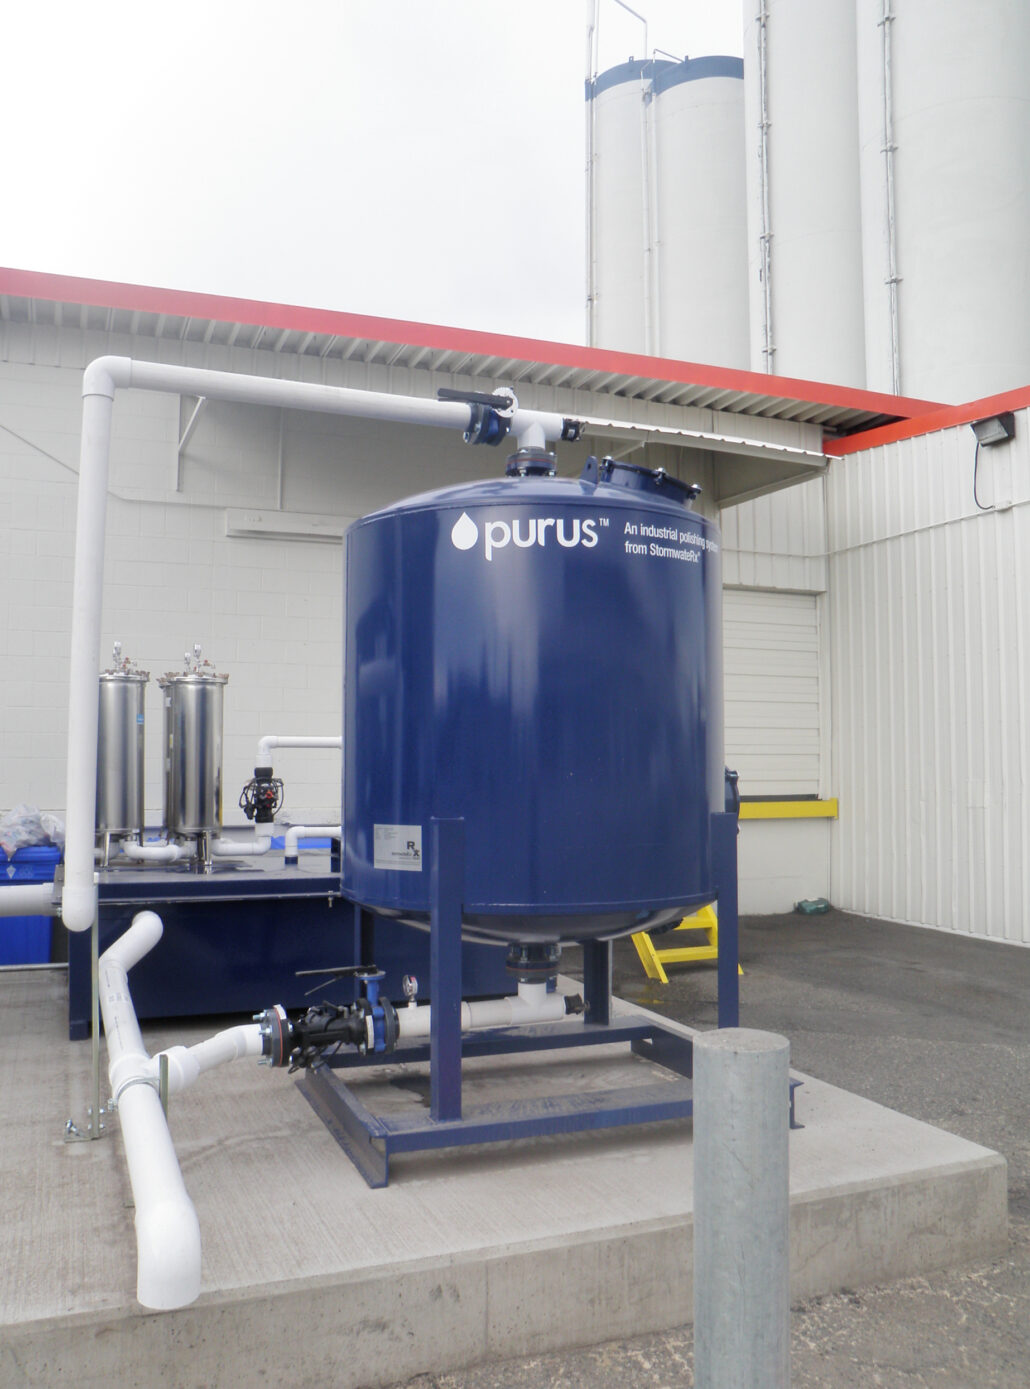 A Newterra Purus polishing system in an industrial application installed on a concrete slab